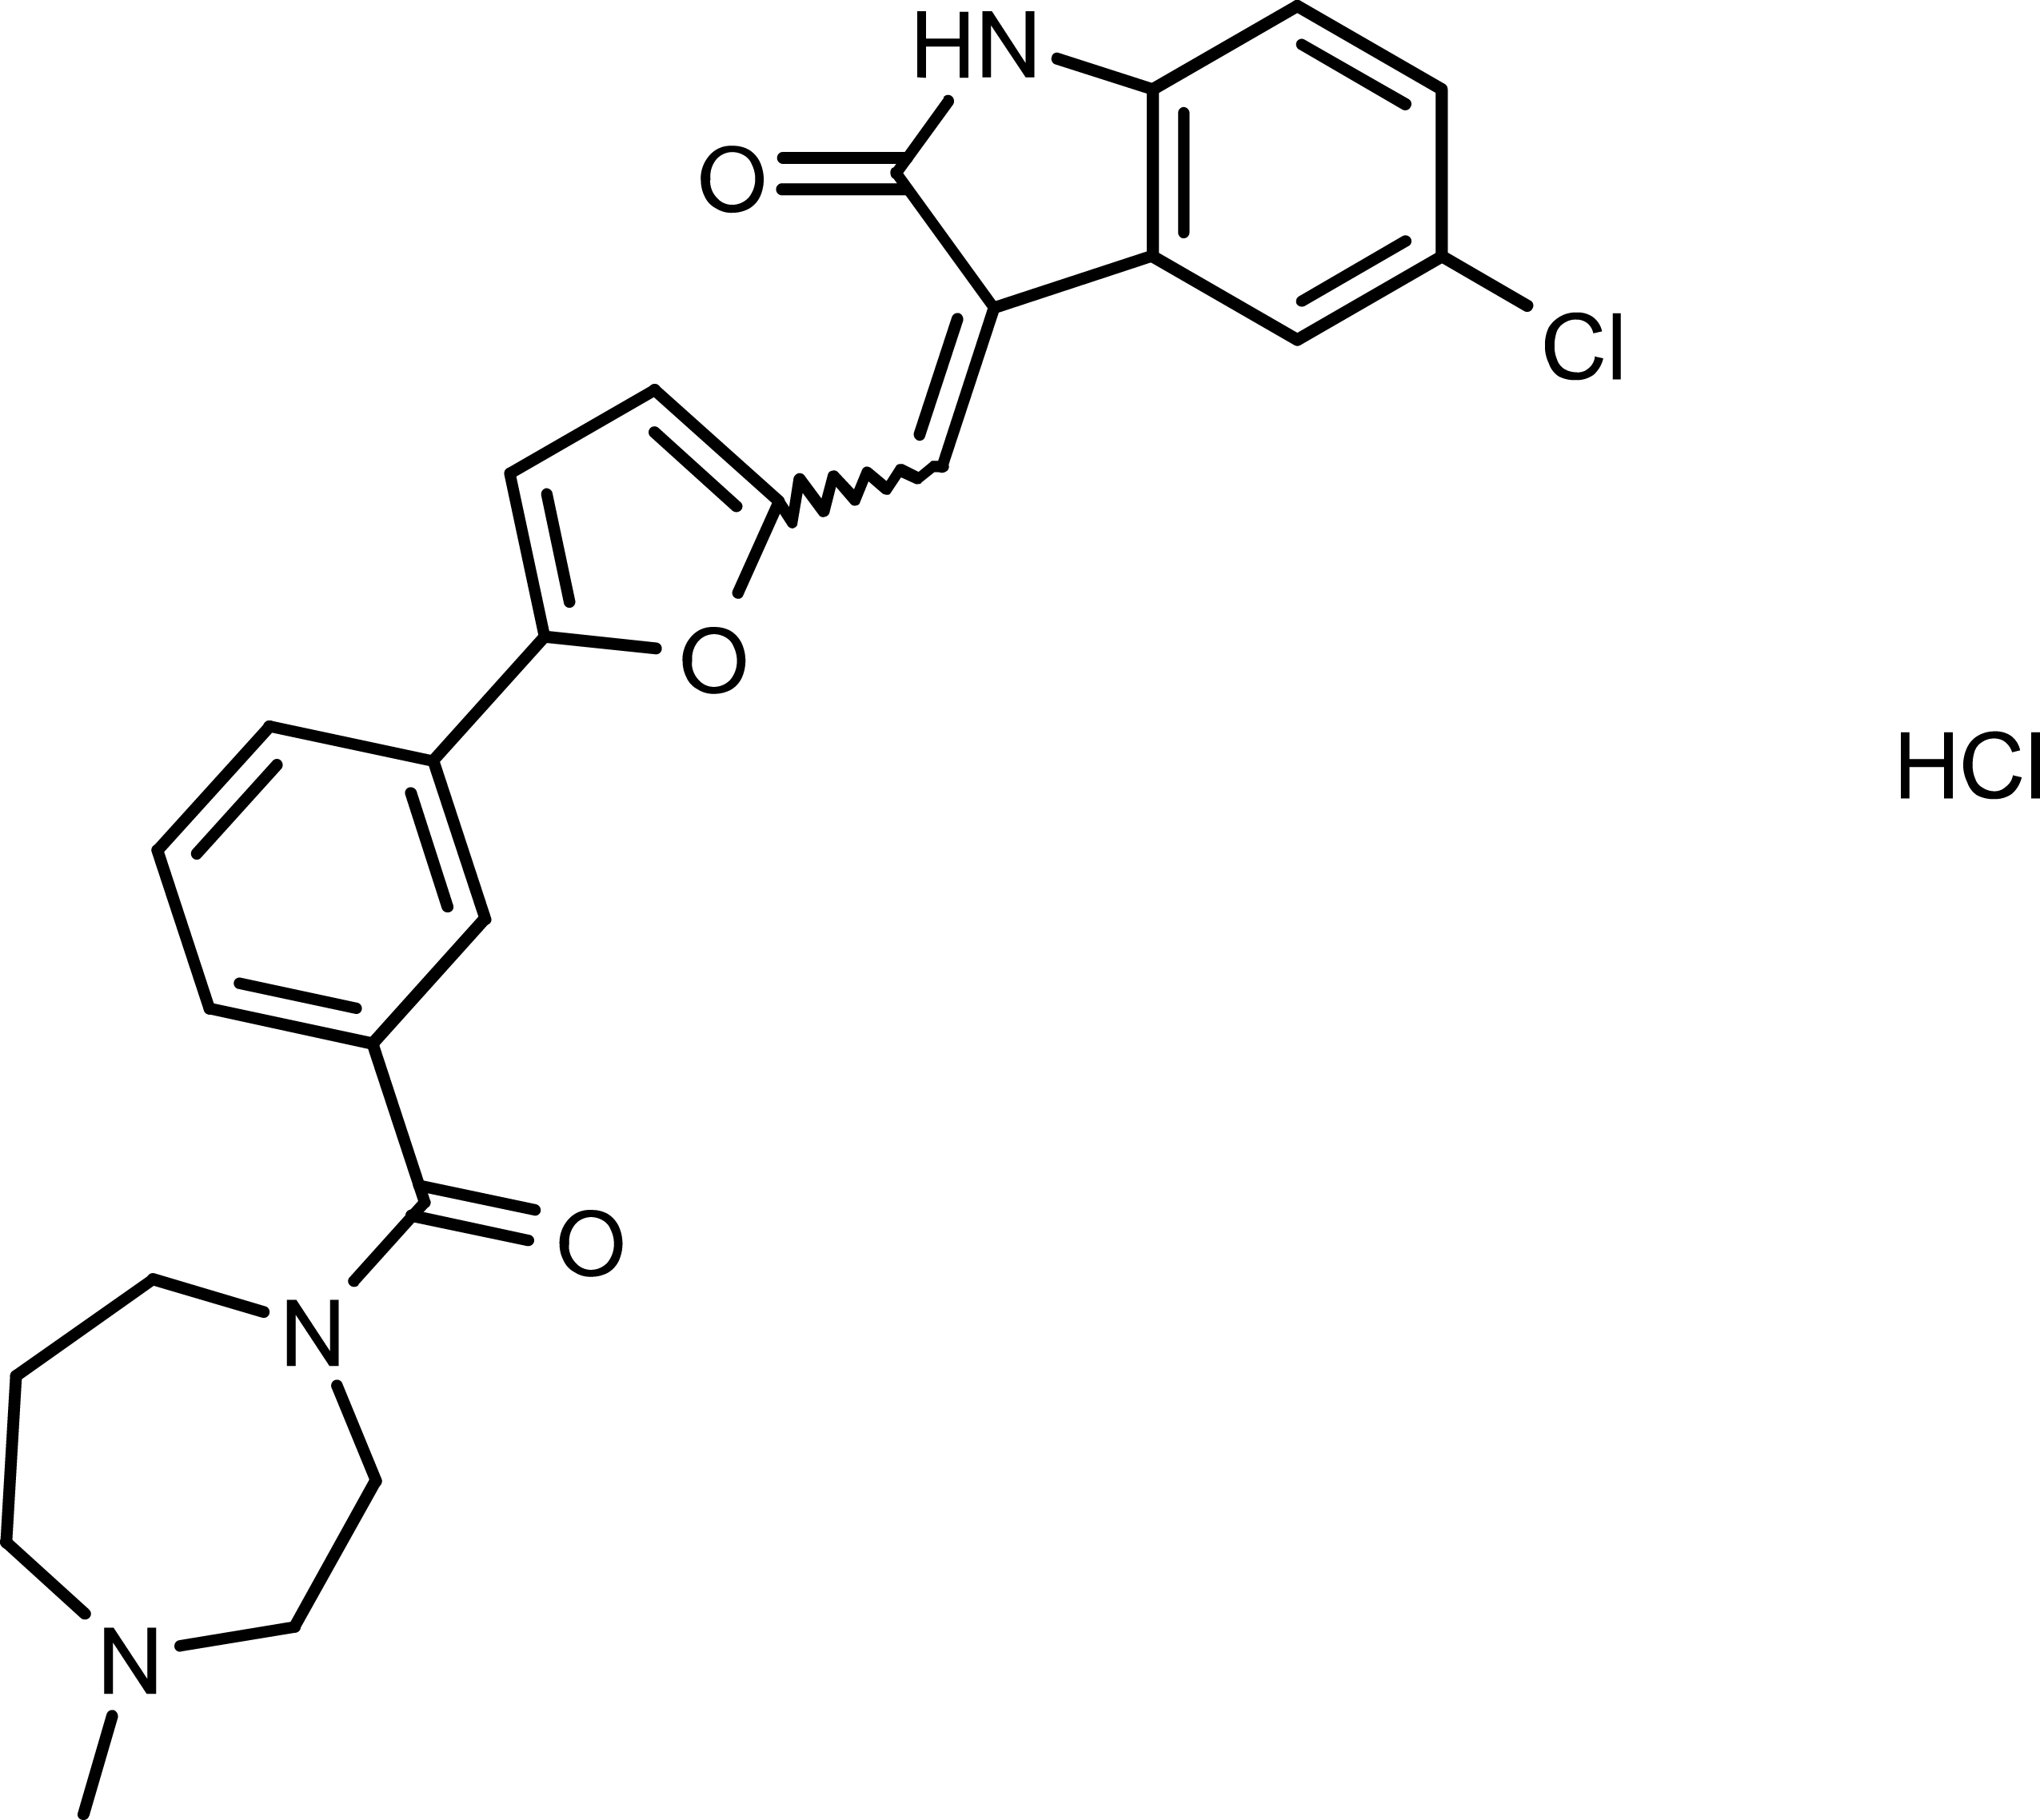 CX-6258 HCl  Chemical Structure